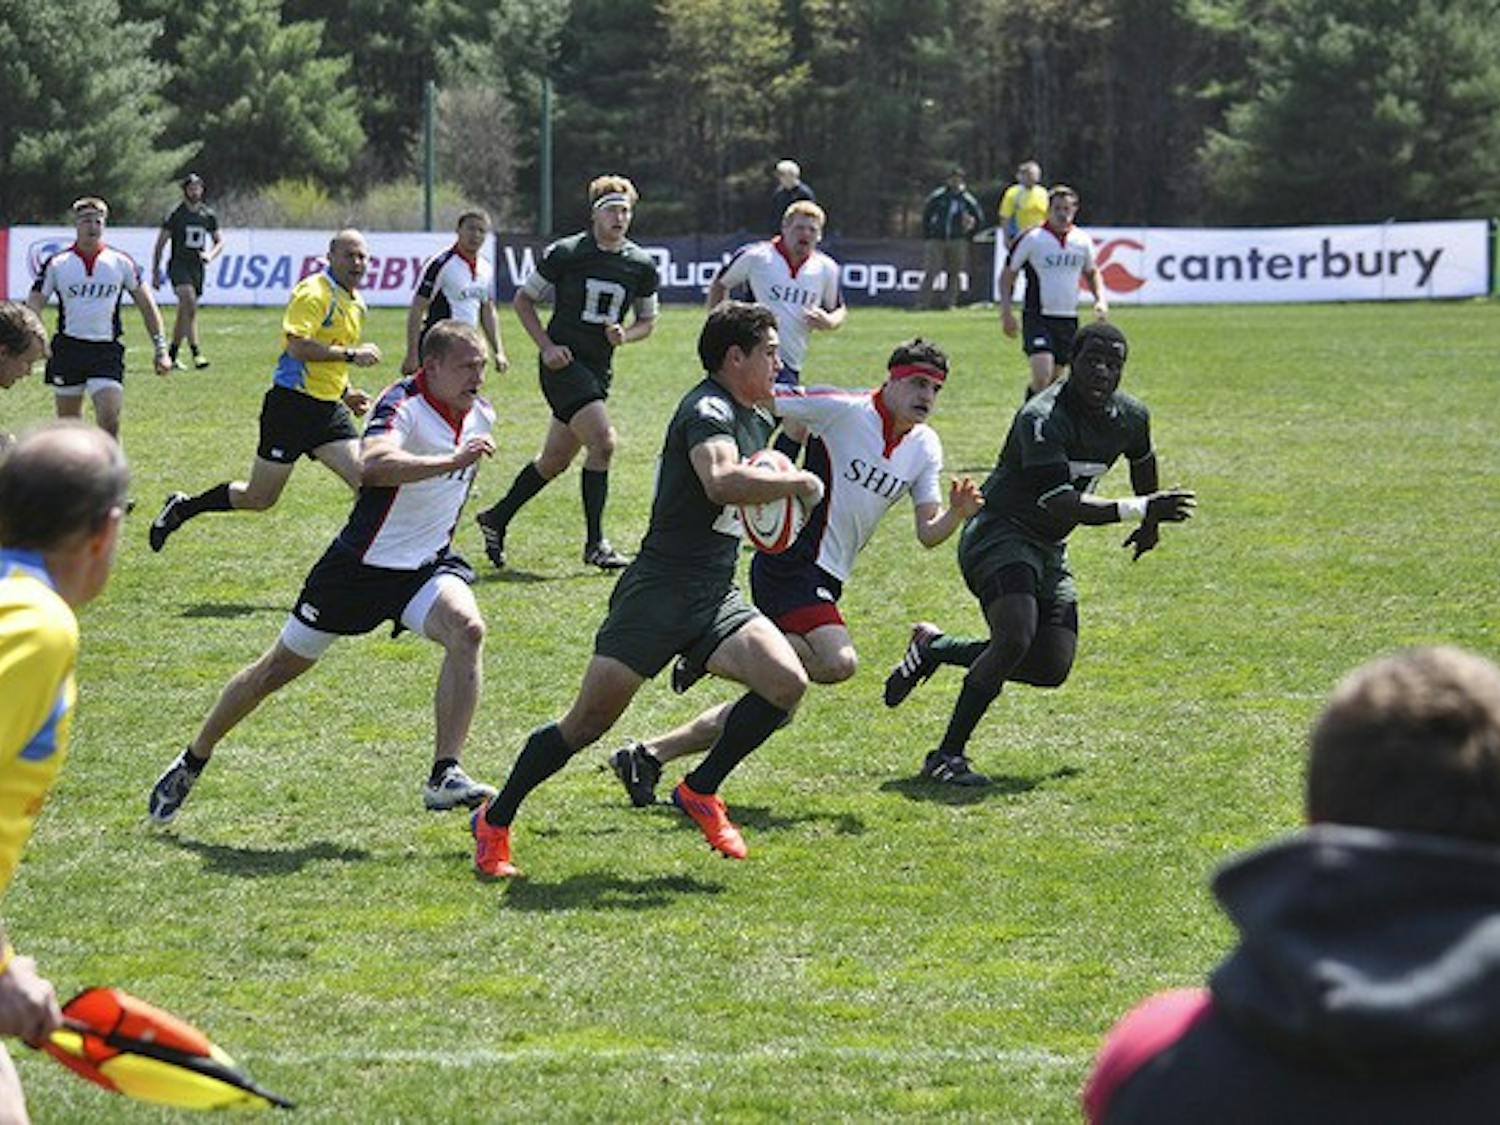 Dartmouth men's rugby defeated Shippensburg and Stony Brook Universities in the NCAA regionals over the weekend.